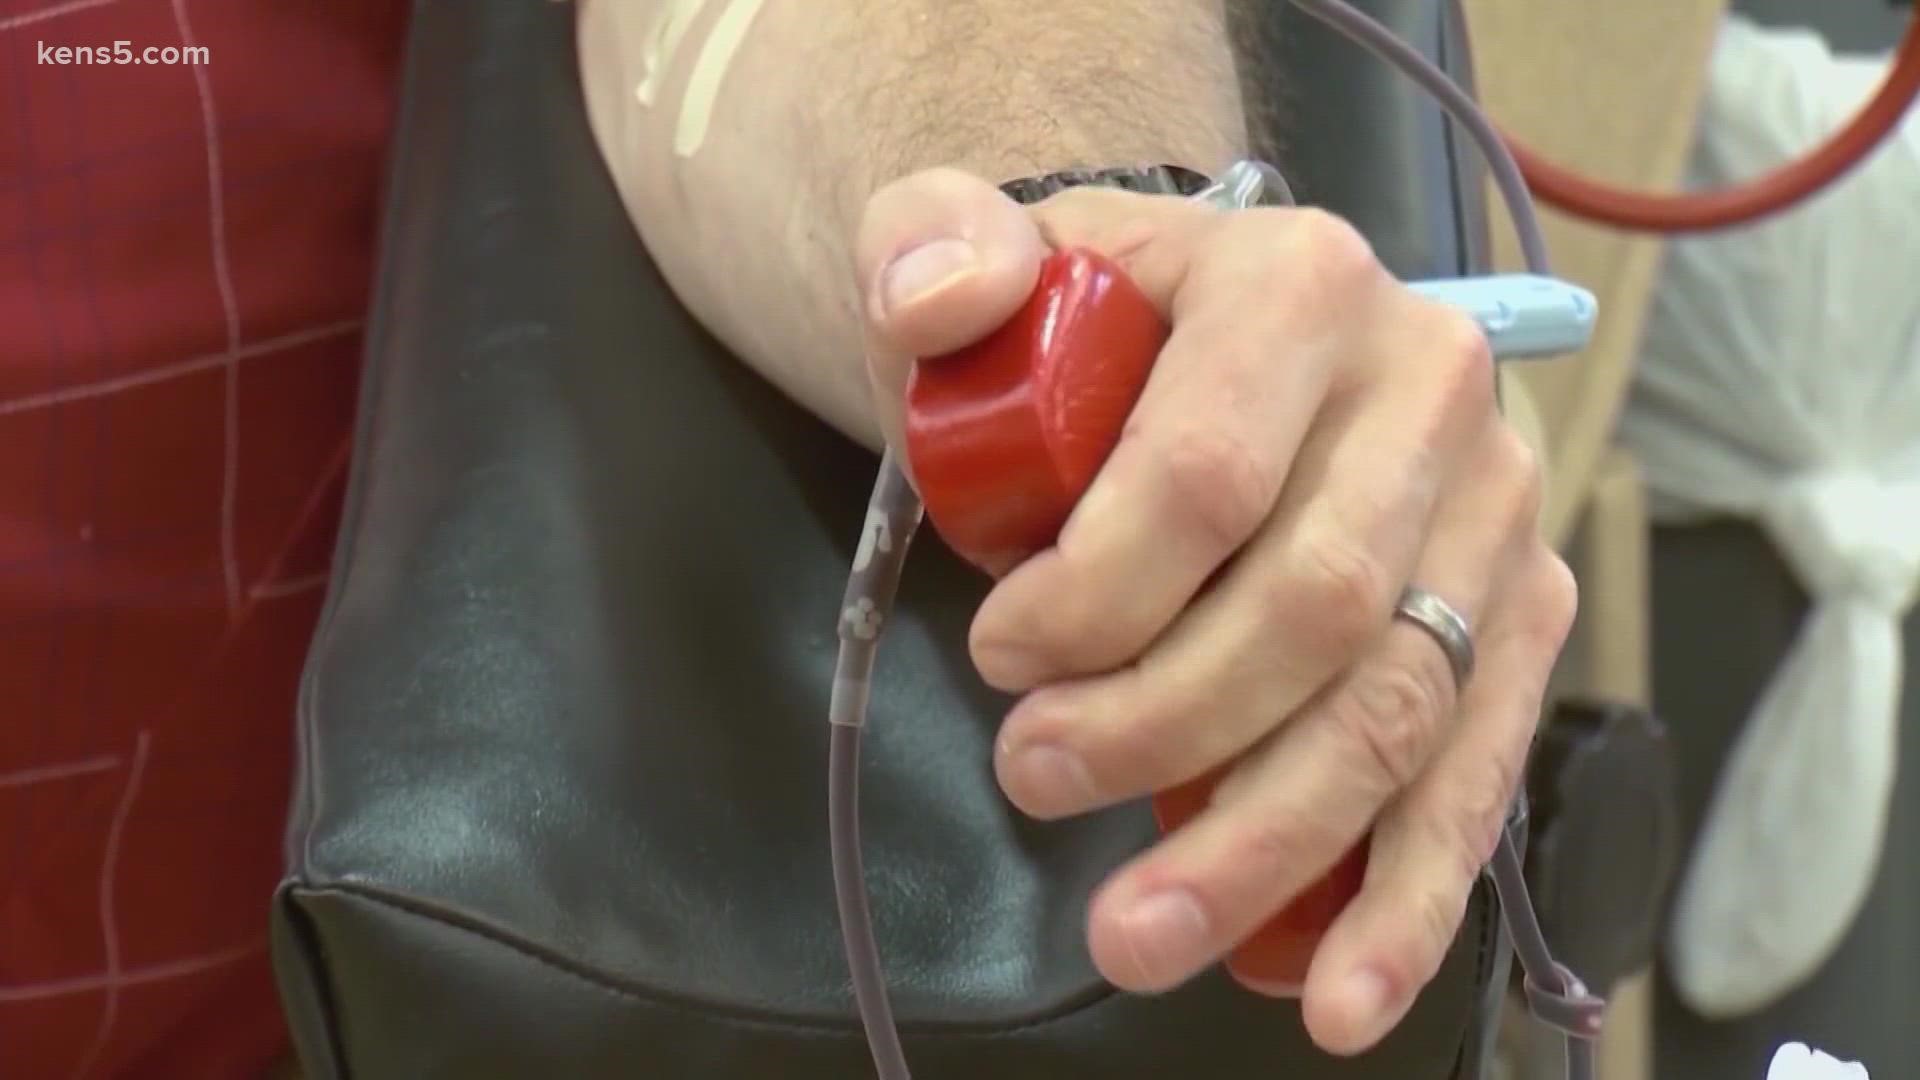 South Texas Blood & Tissue Center is hoping the incentive will improve the shortage of blood by increasing it back to a three-day supply.